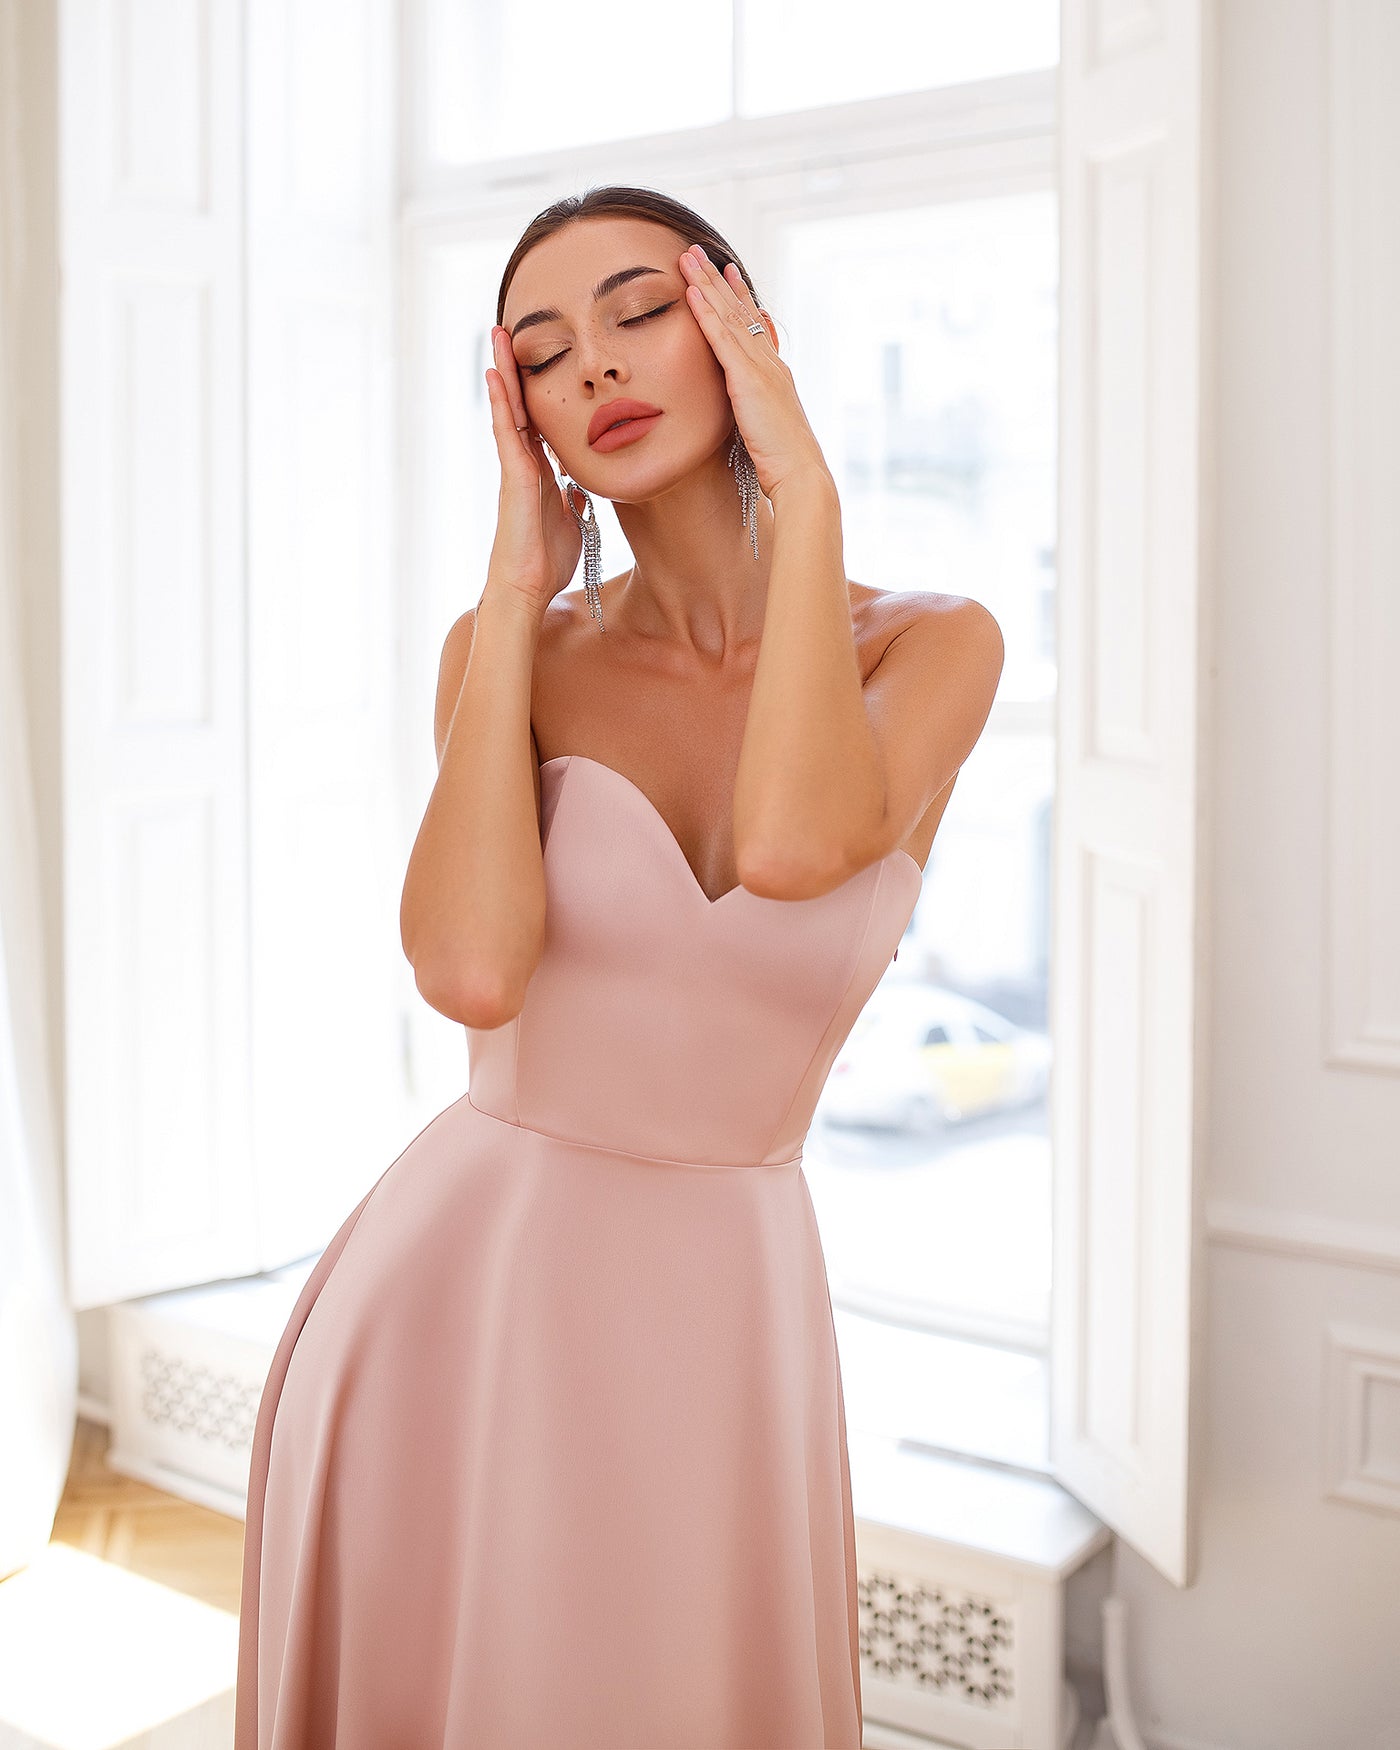 Dusty Pink Satin Corseted Strapless Dress (article 047)